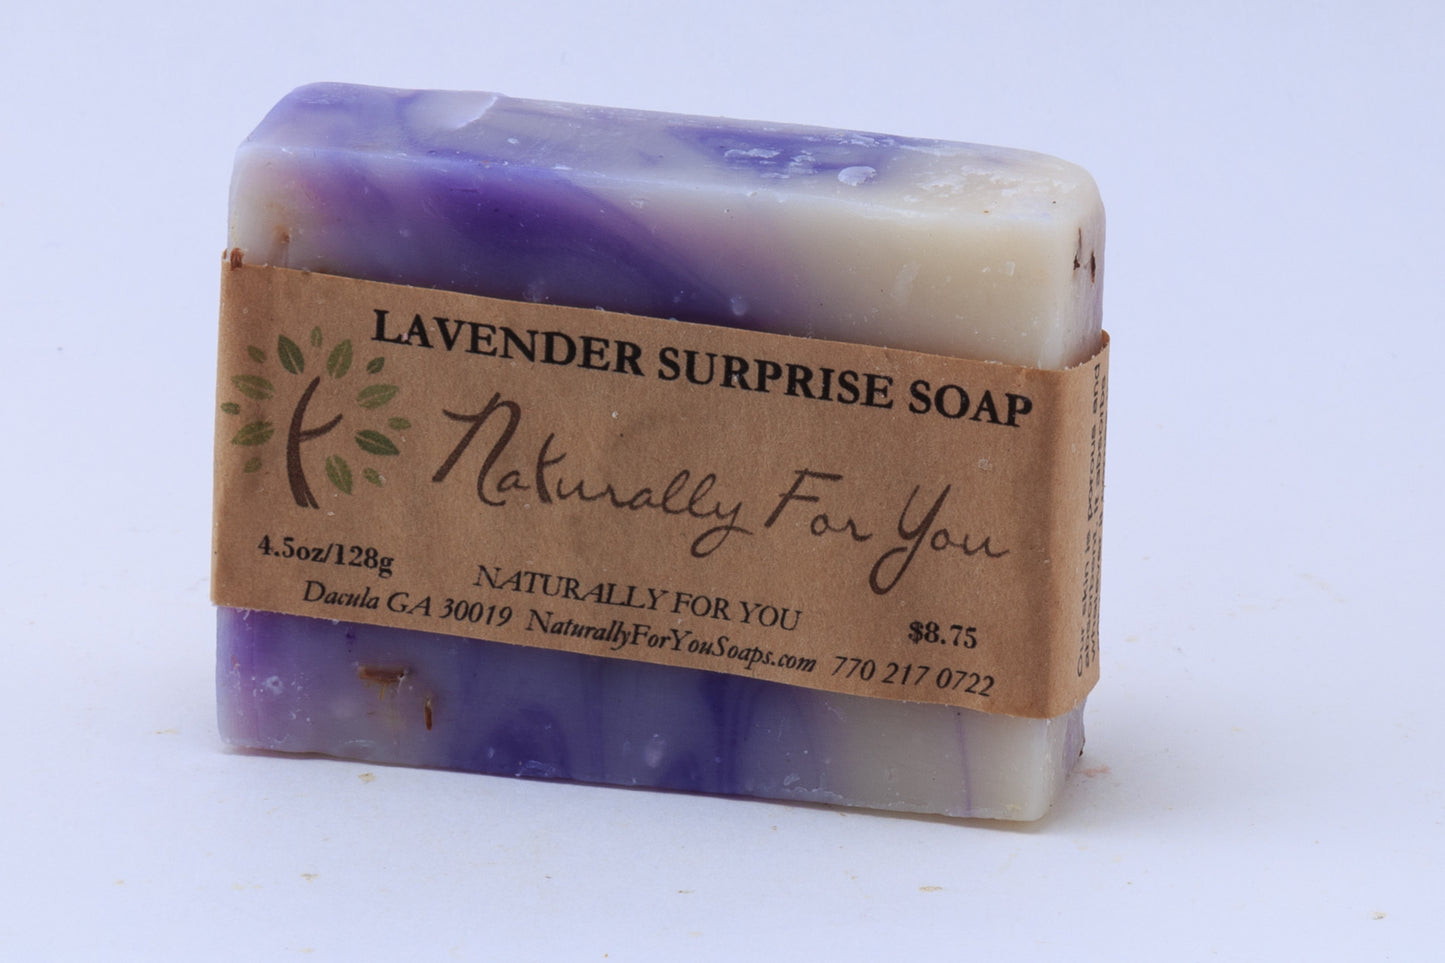 Lavender Surprise Soap - Naturally For You Bath n Body